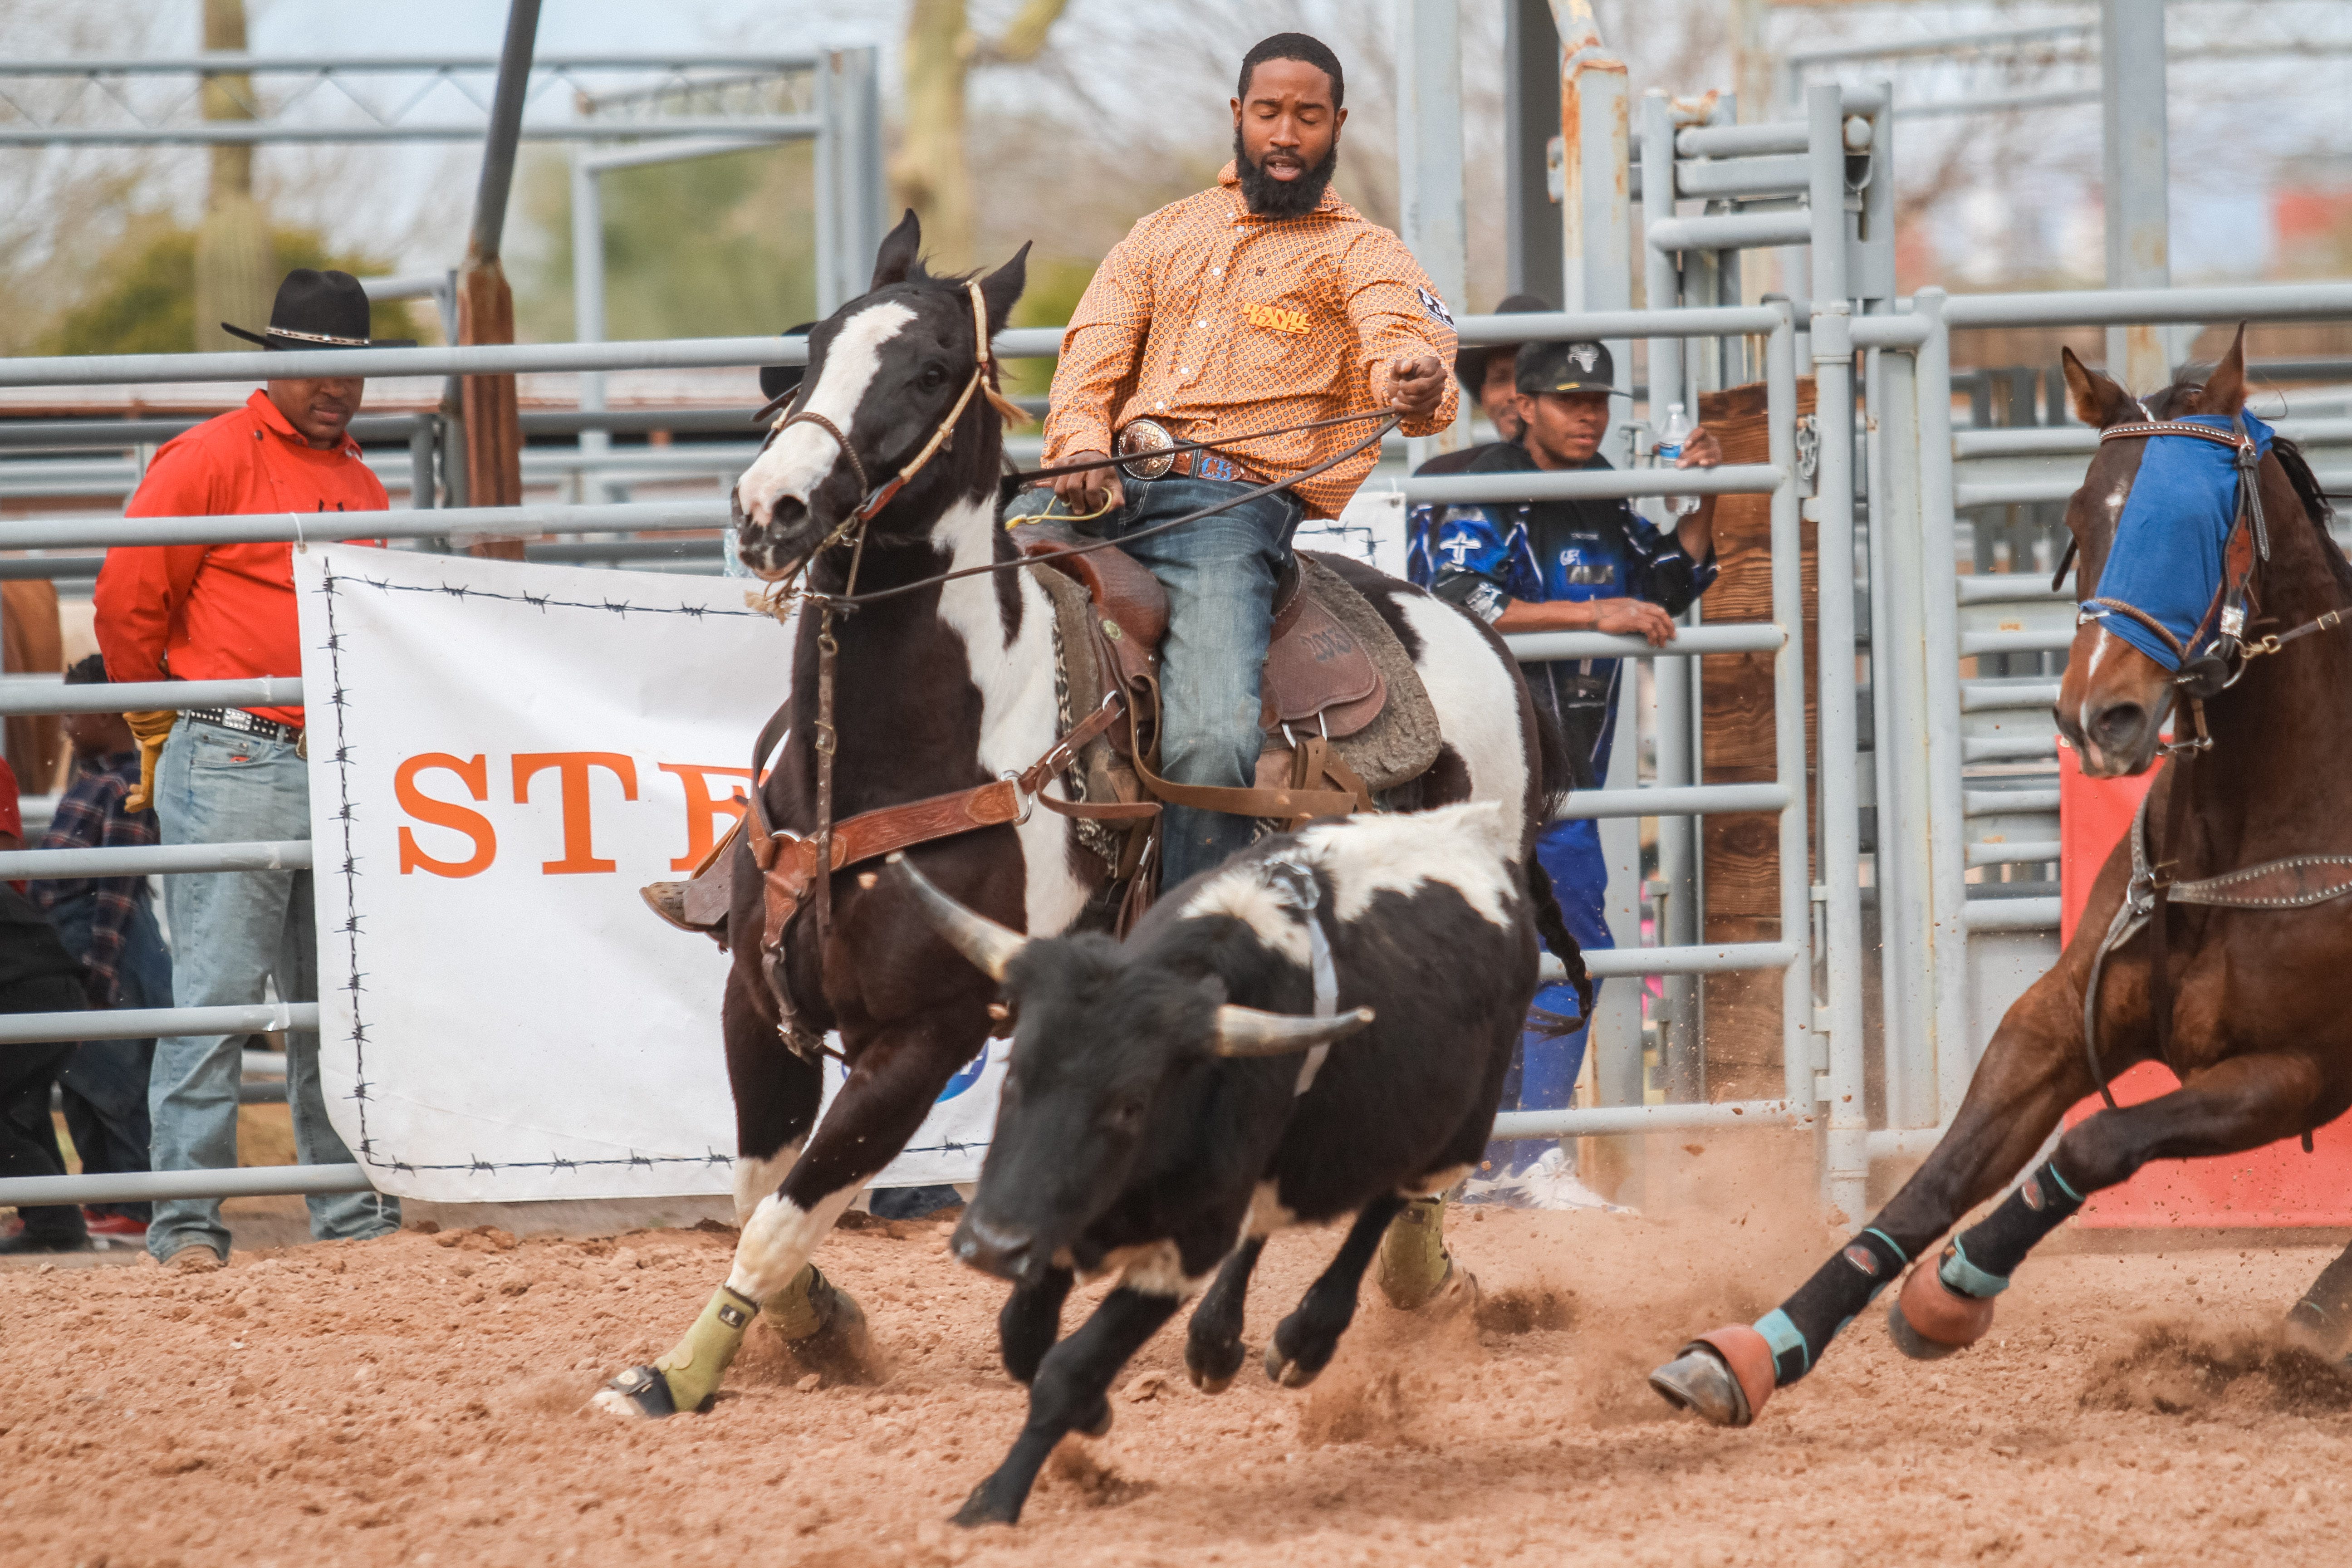 Arizona Black Rodeo returns to Rawhide in Chandler, attracting more